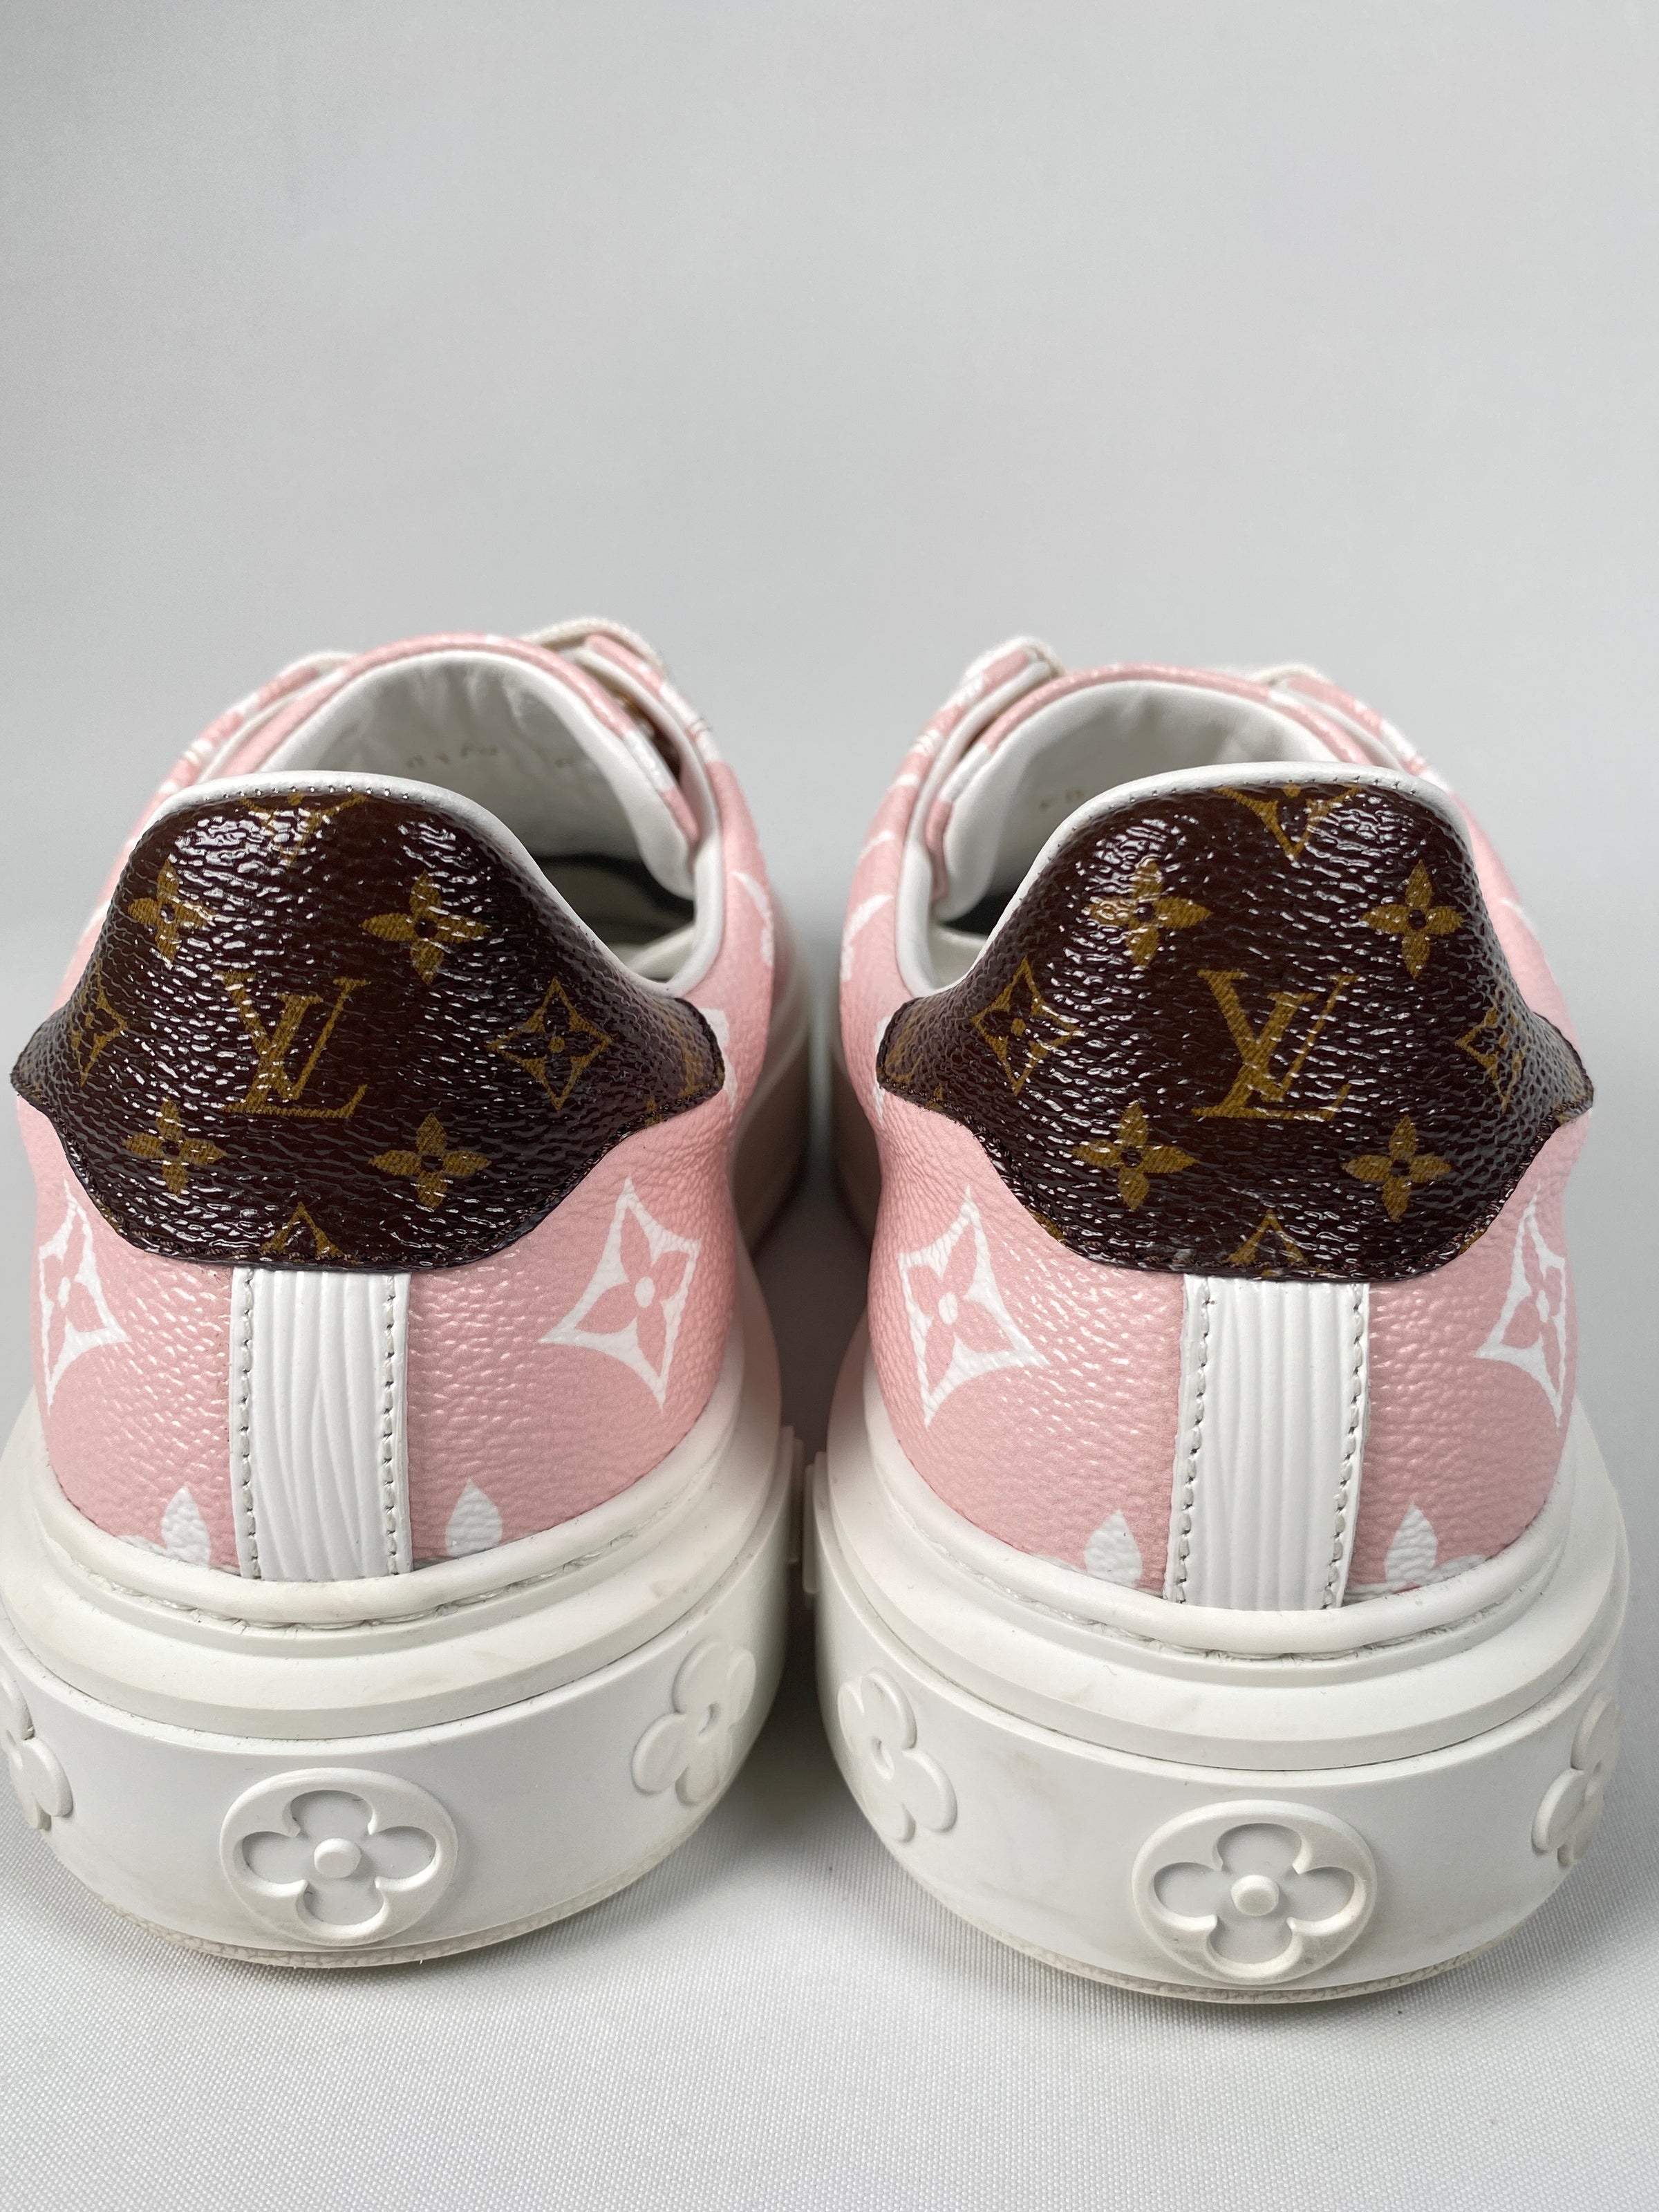 LOUIS VUITTON - TIME OUT SNEAKER IN ROSE - SZ 38 – RE.LUXE AU